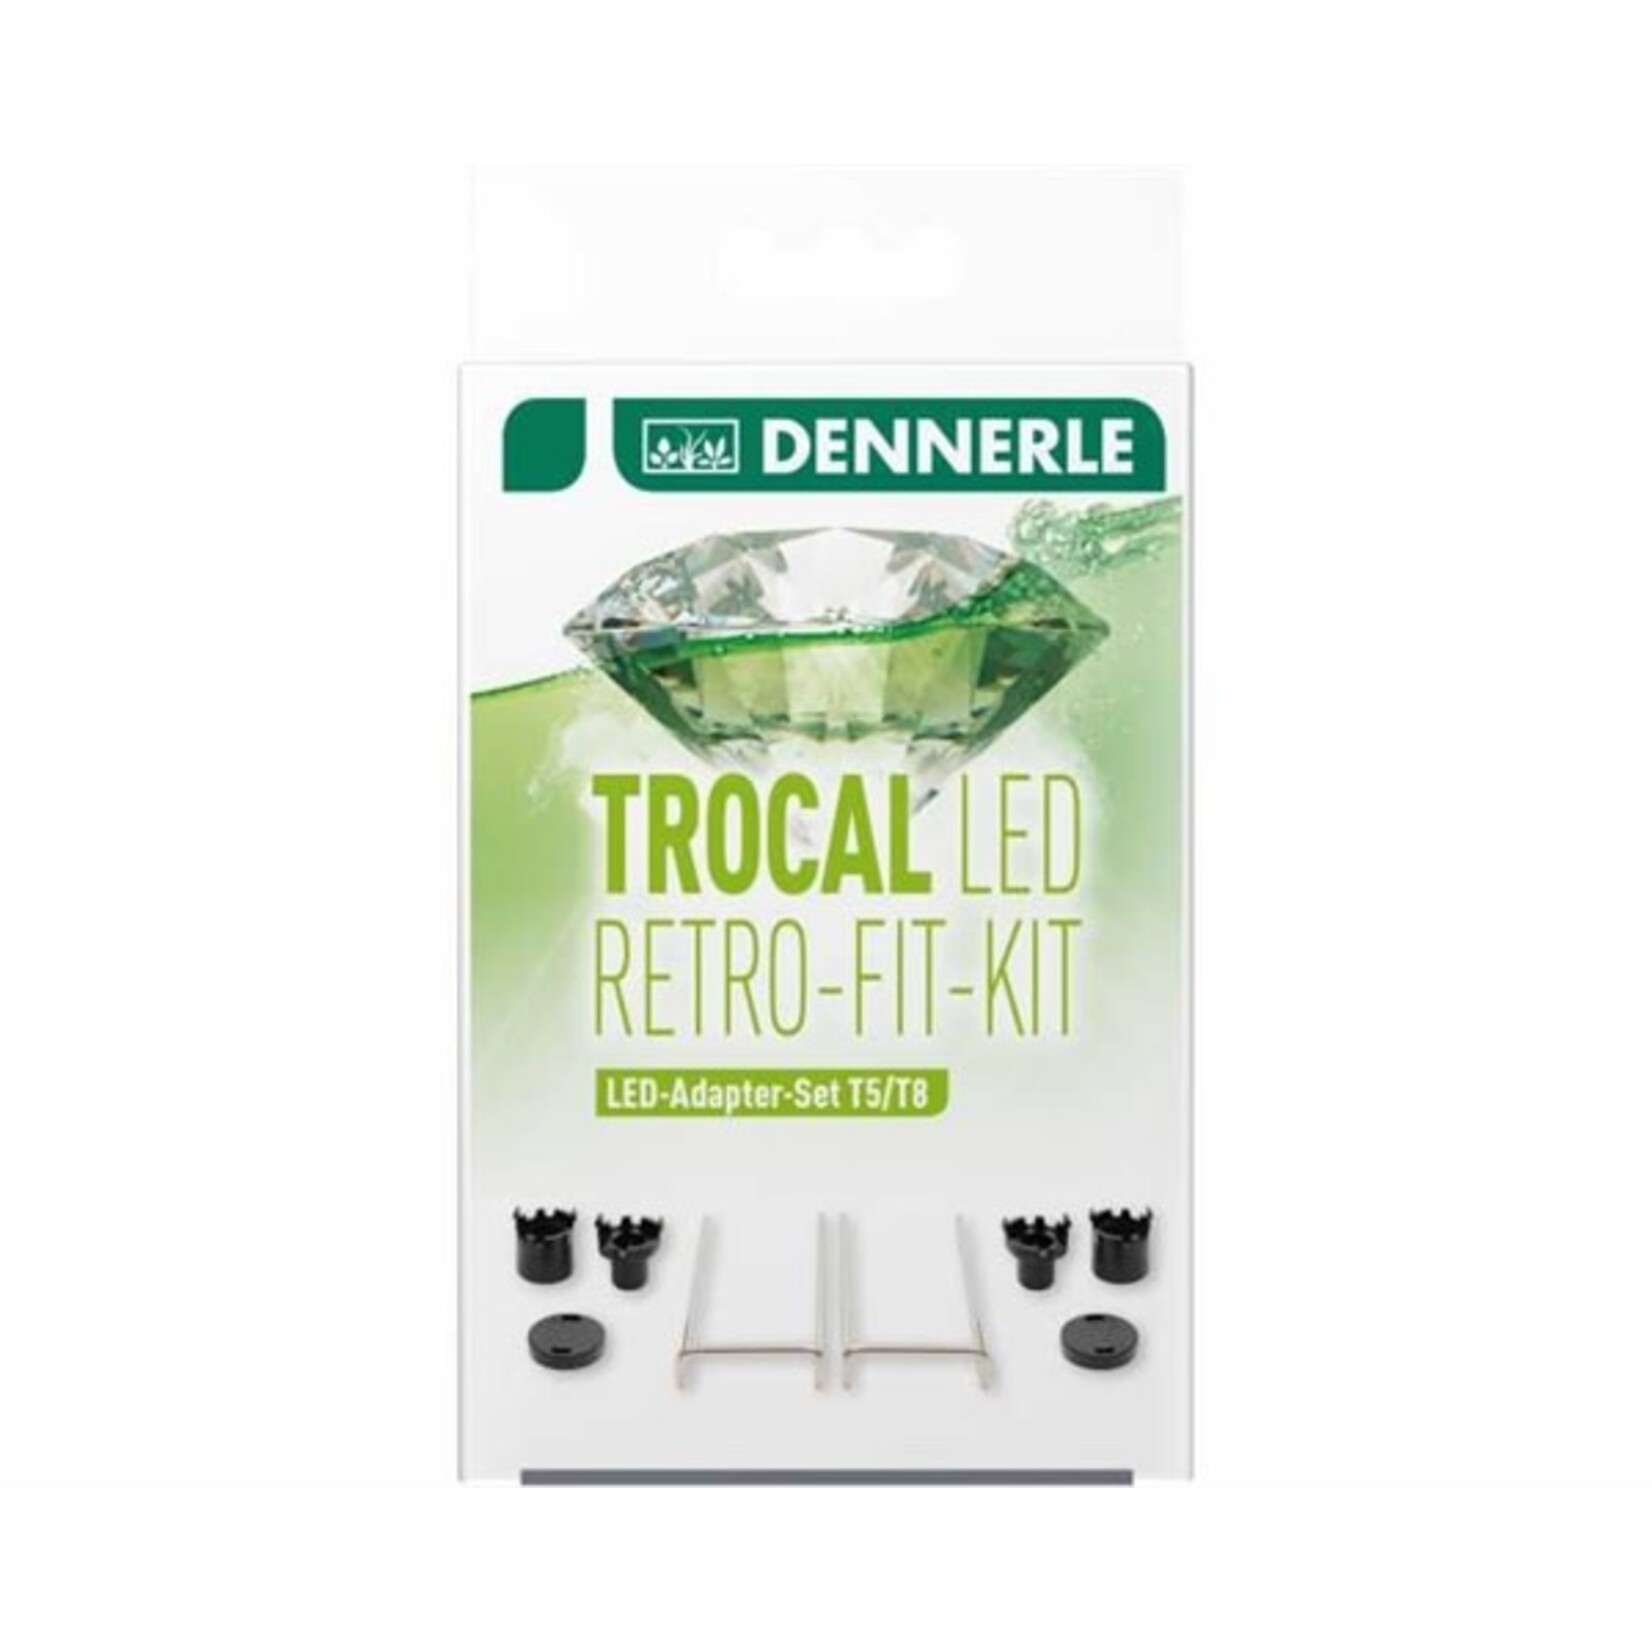 Dennerle Trocal adapter set t5/t8